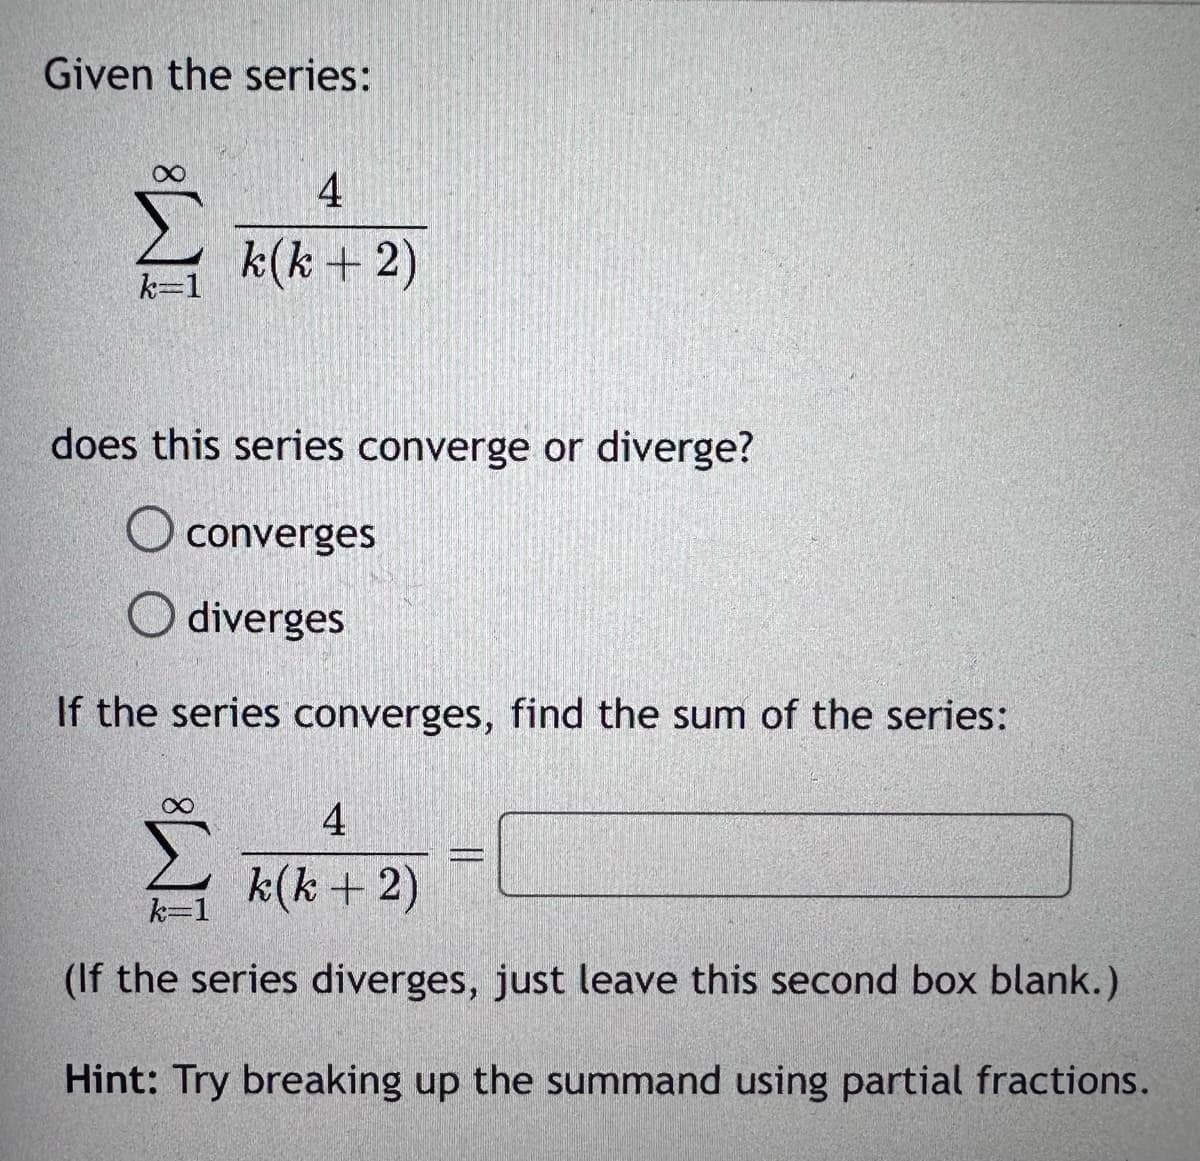 Given the series:
8
k=1
does this series converge or diverge?
O converges
diverges
If the series converges, find the sum of the series:
∞
4
k(k+2)
4
k(k+ 2)
(If the series diverges, just leave this second box blank.)
Hint: Try breaking up the summand using partial fractions.
k=1
PROPIN